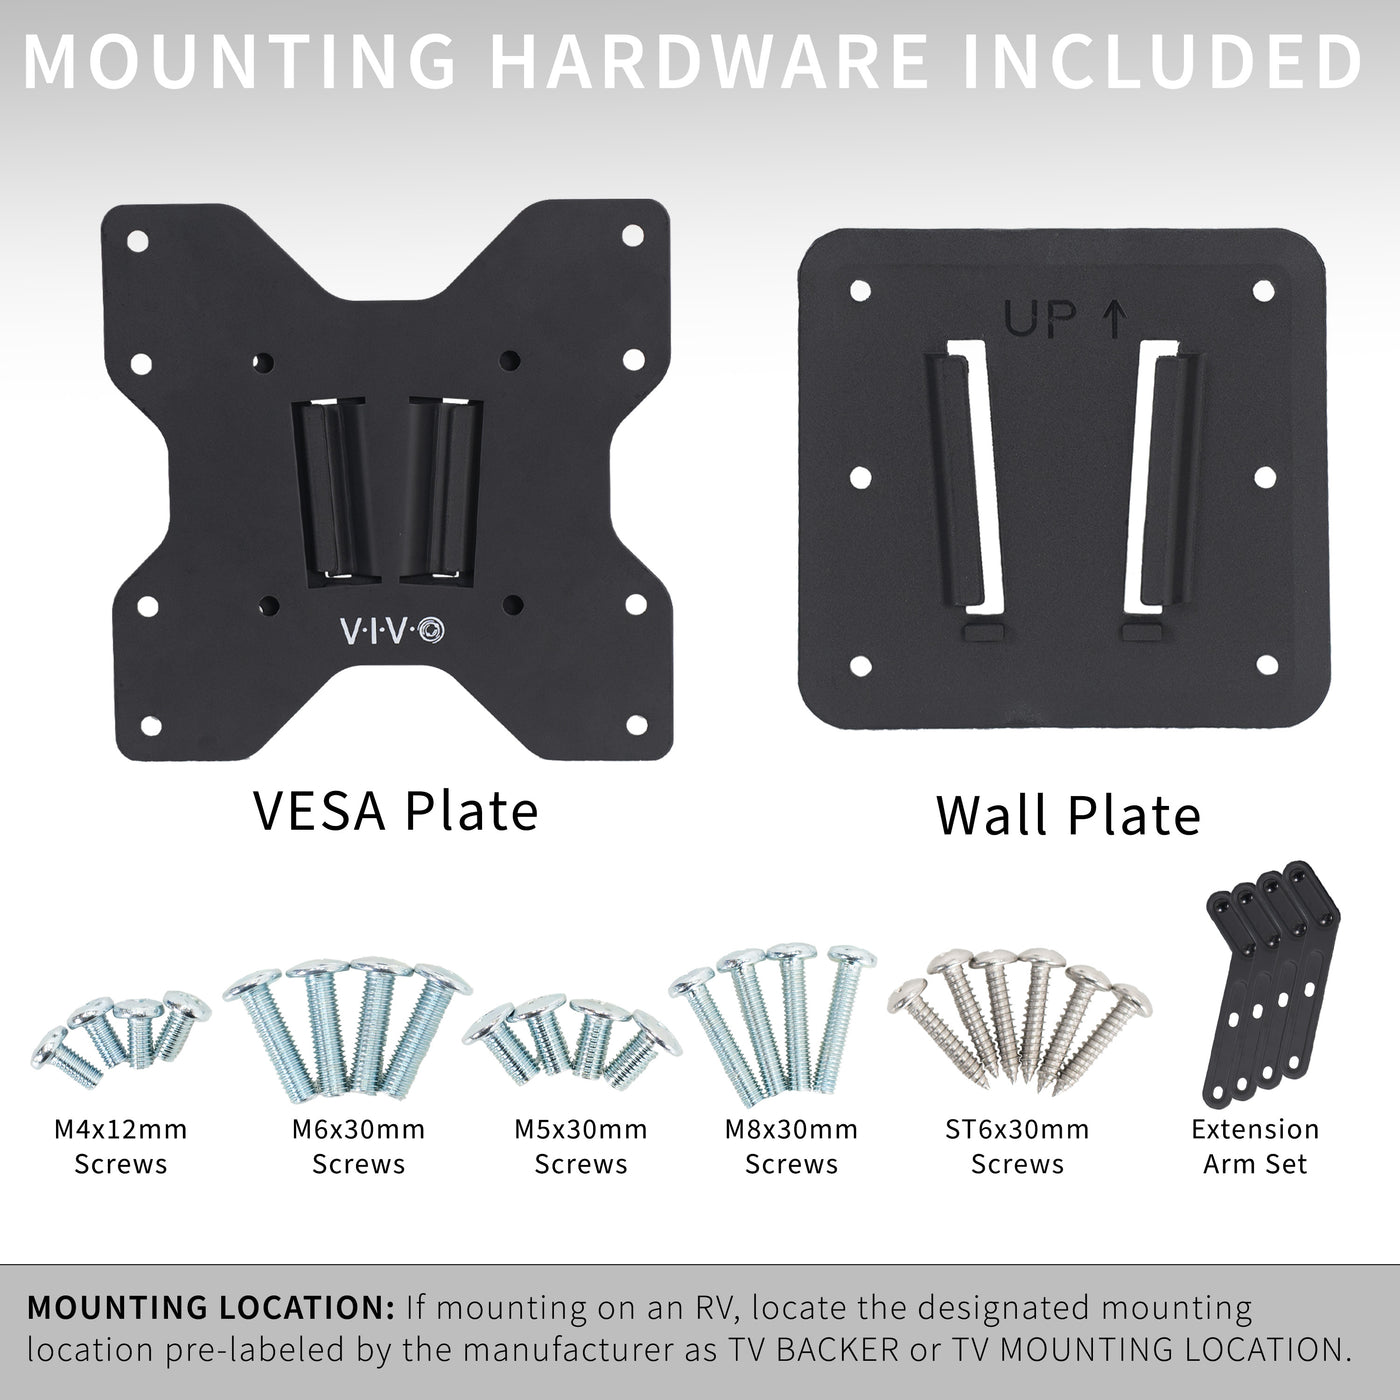 Anti-rust RV VESA TV mount for large screens featuring easy installation and removal and all necessary hardware included. Suitable for indoor or outdoor mounting.